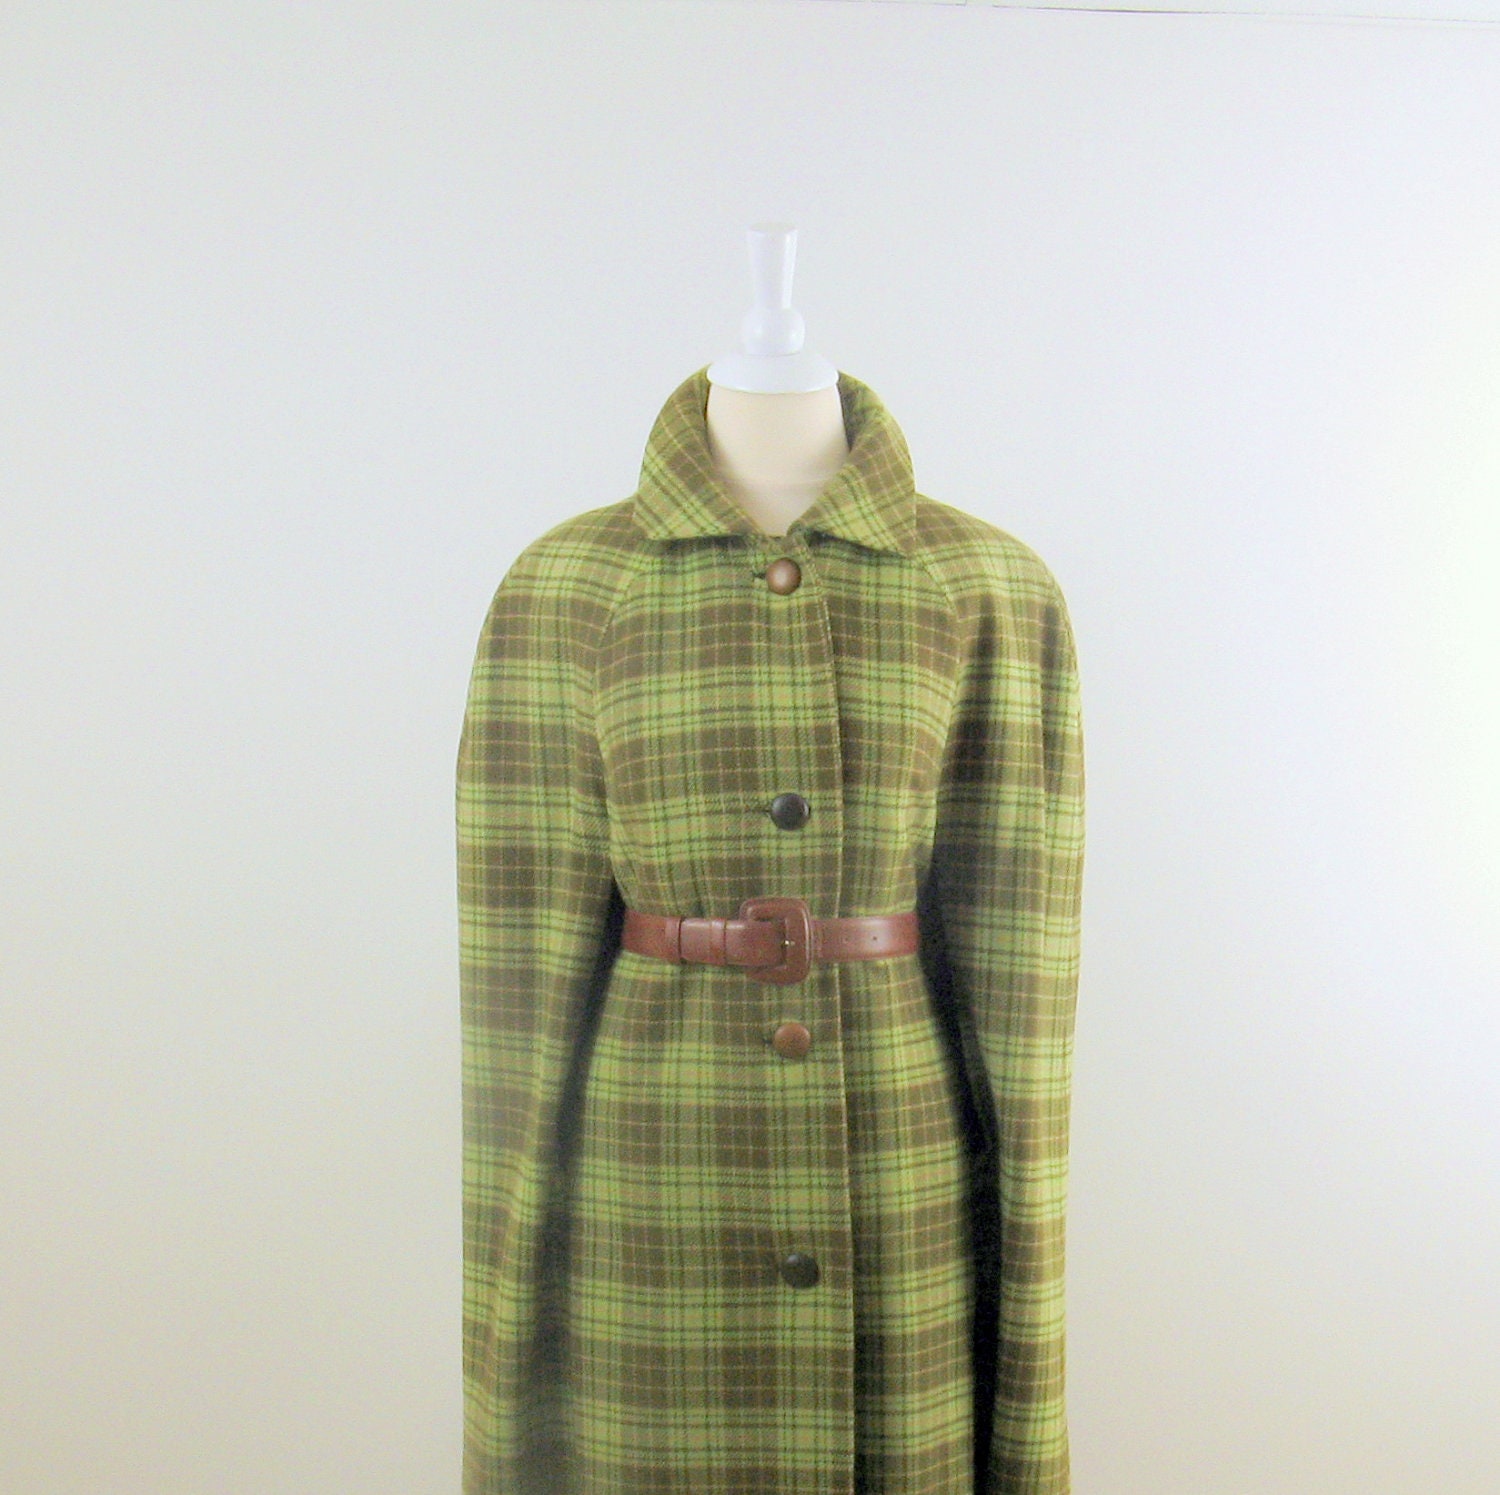 Vintage Wool Cape - 1960s Green Plaid - One Size by Habig Rodex England - TwoMoxie